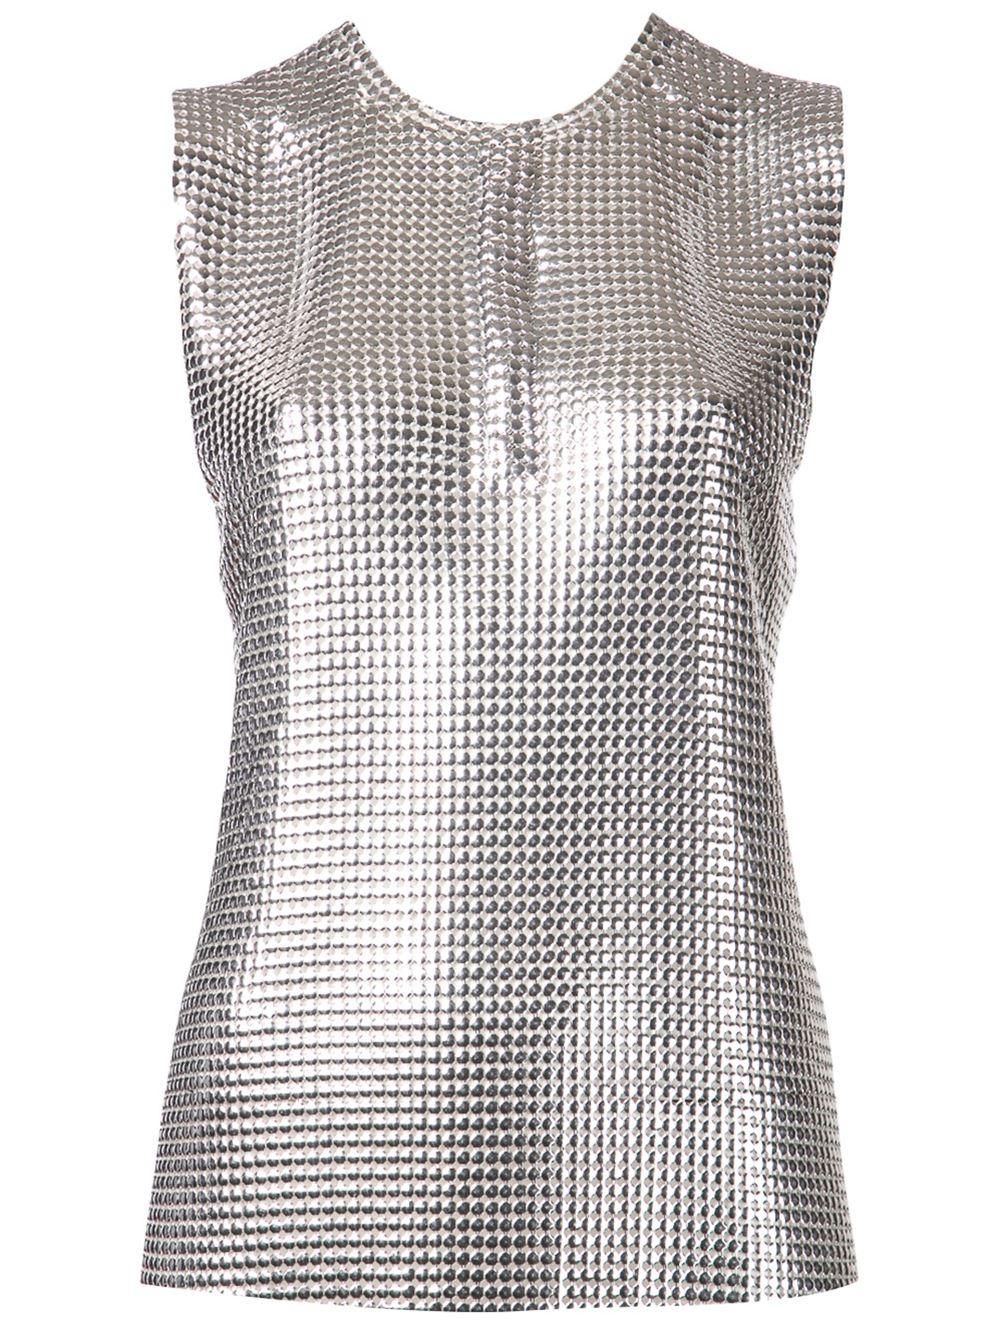 Lyst - Paco Rabanne Chainmail Top in Metallic